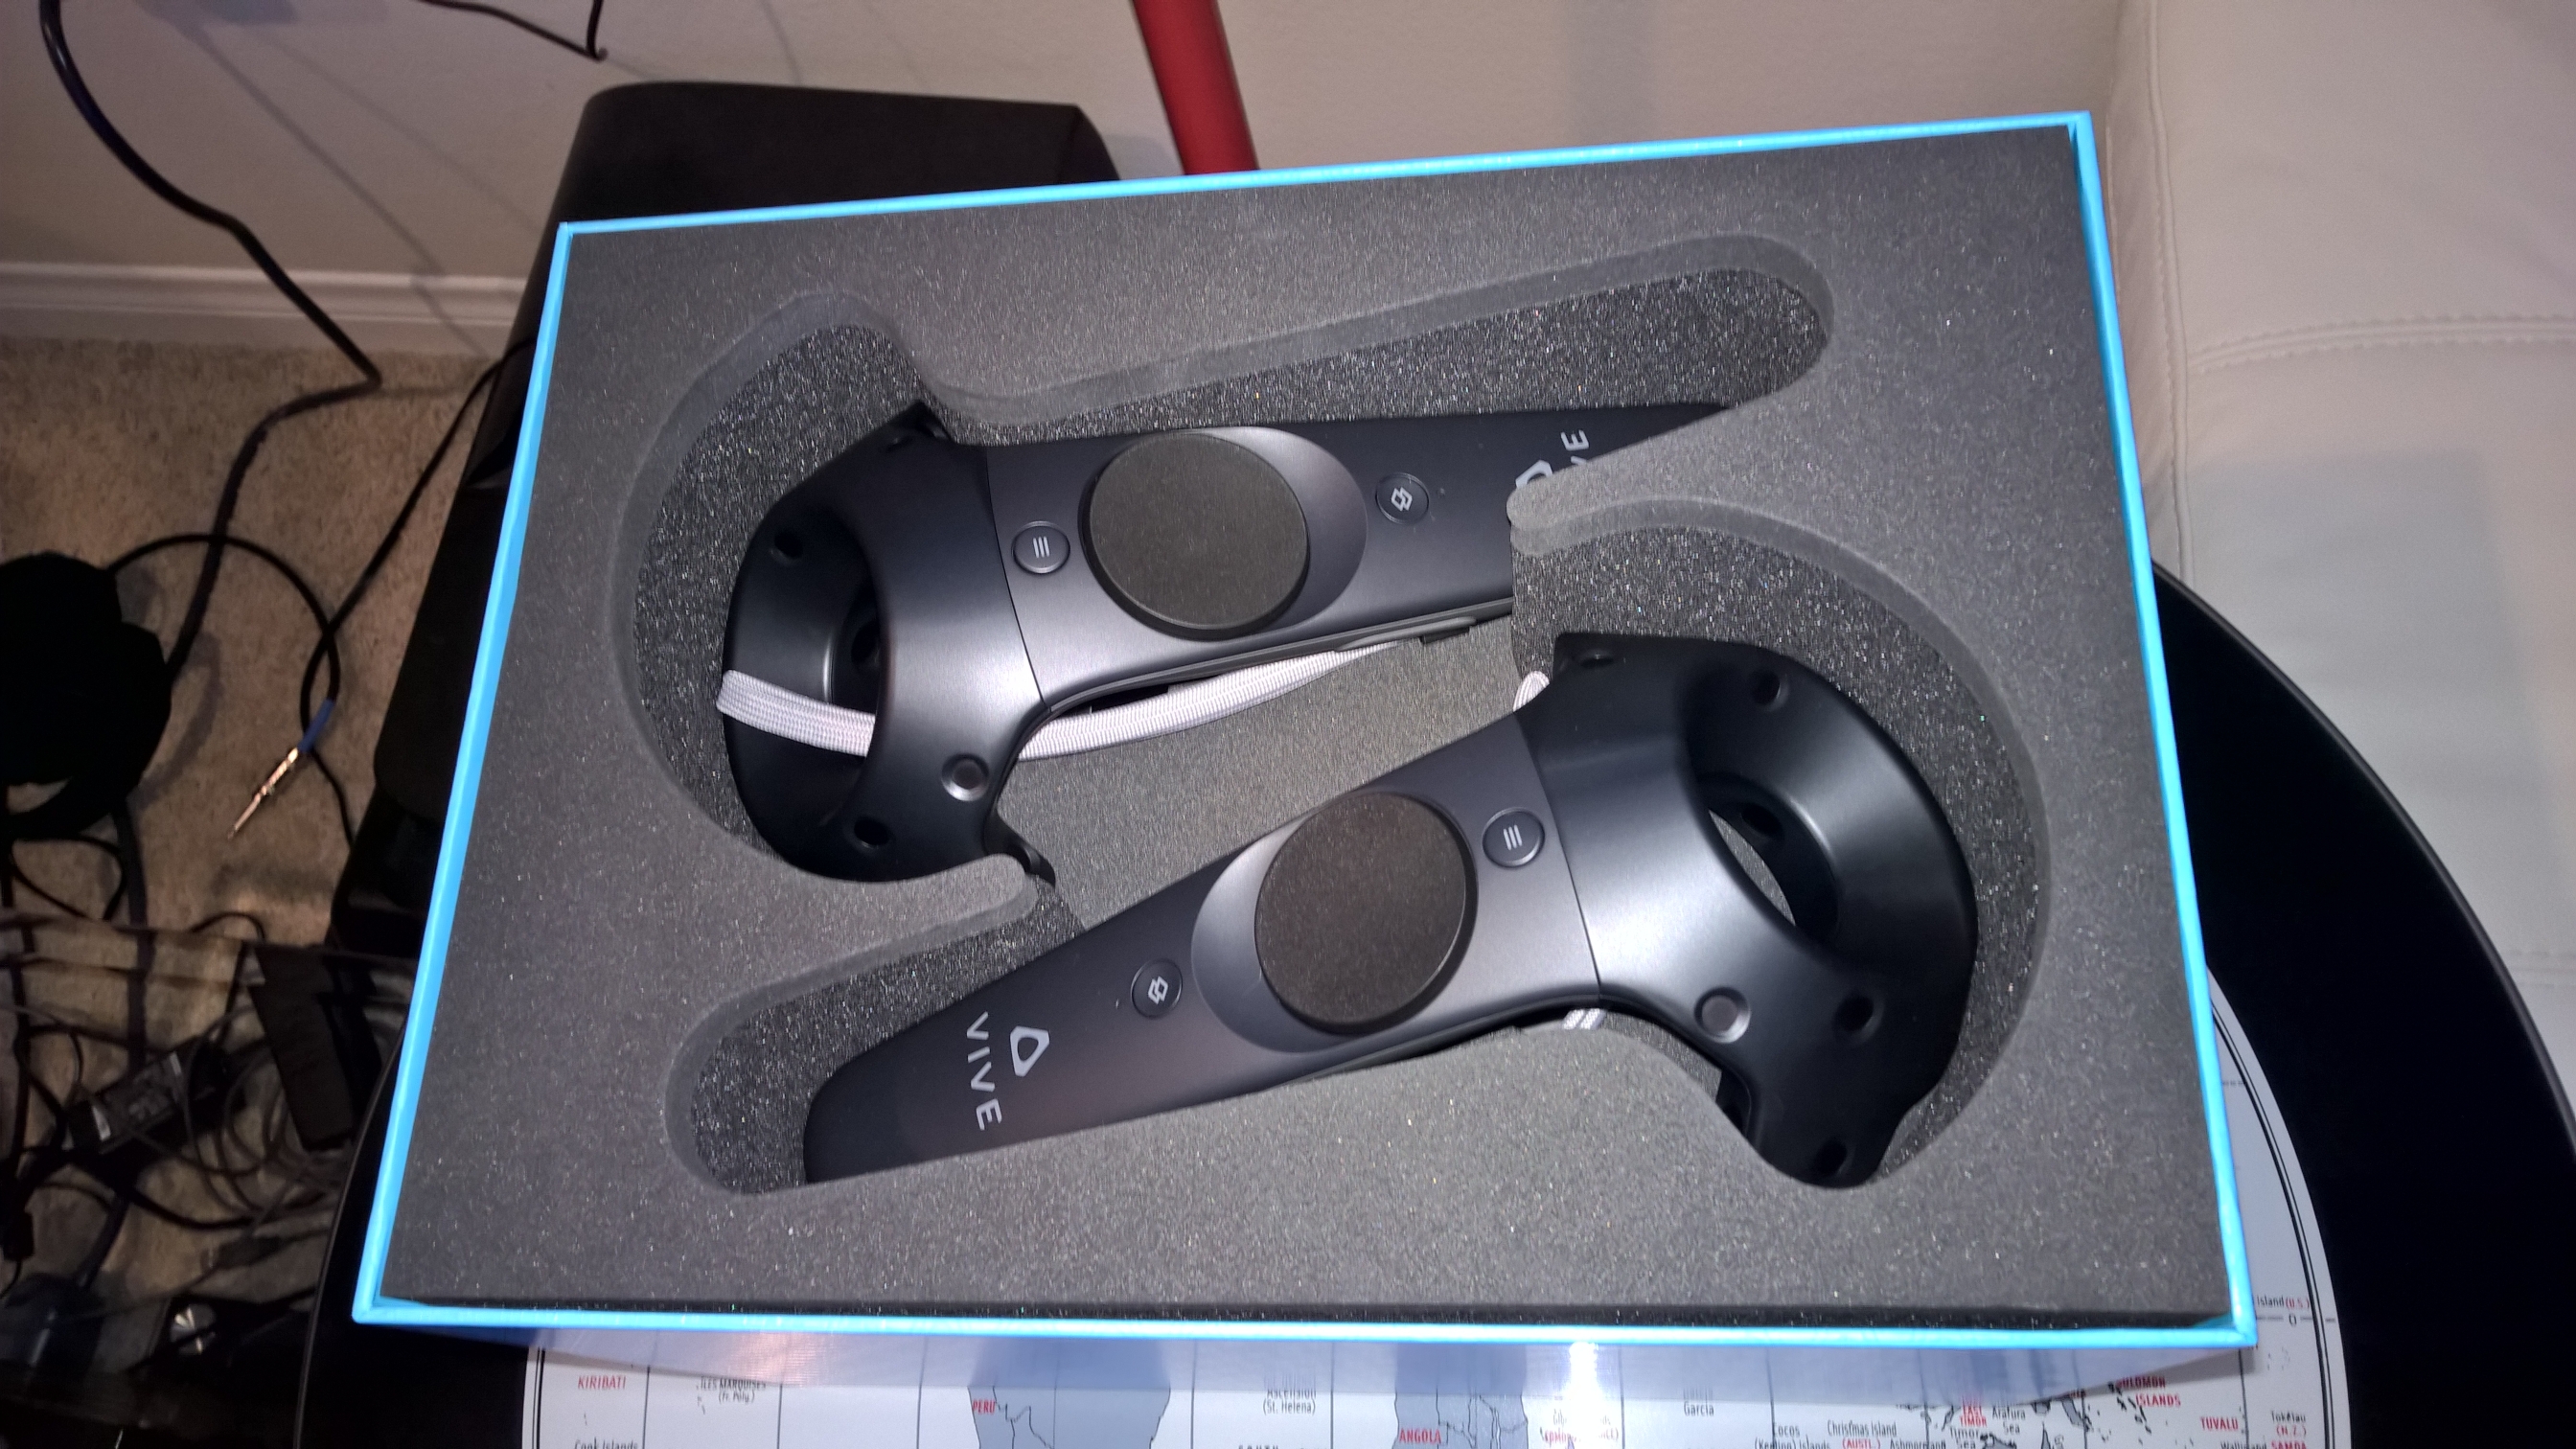 Vive controllers